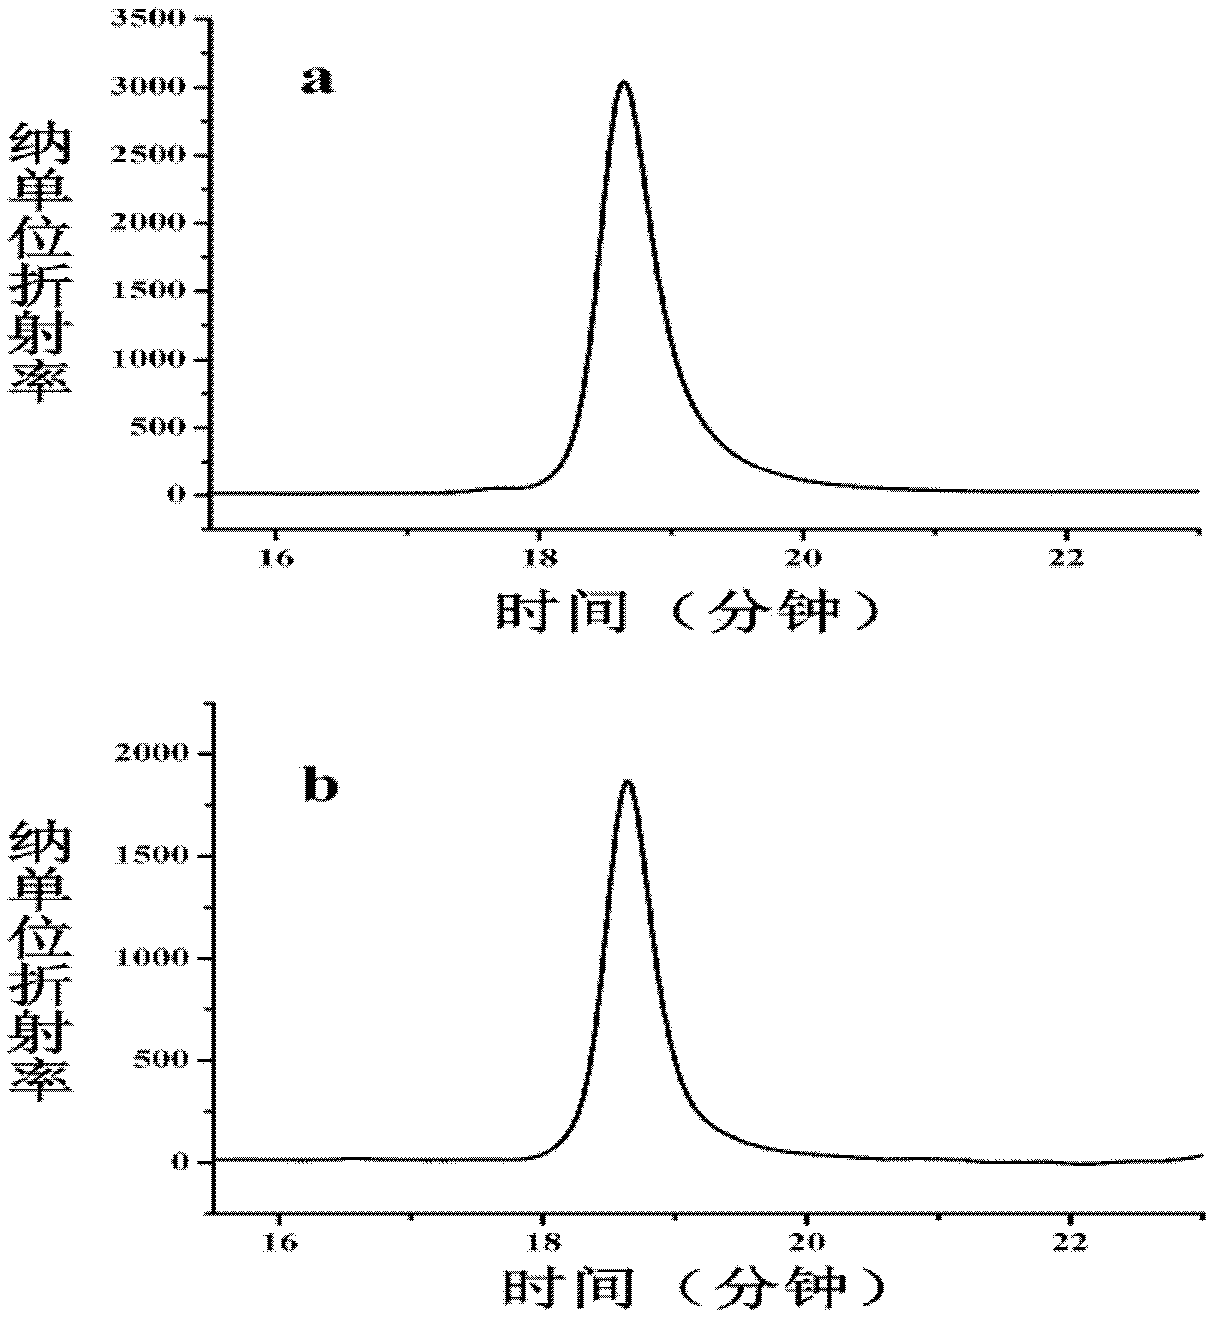 Method for preparing alpha-ketobutyric acid by using L-threonine as substrate